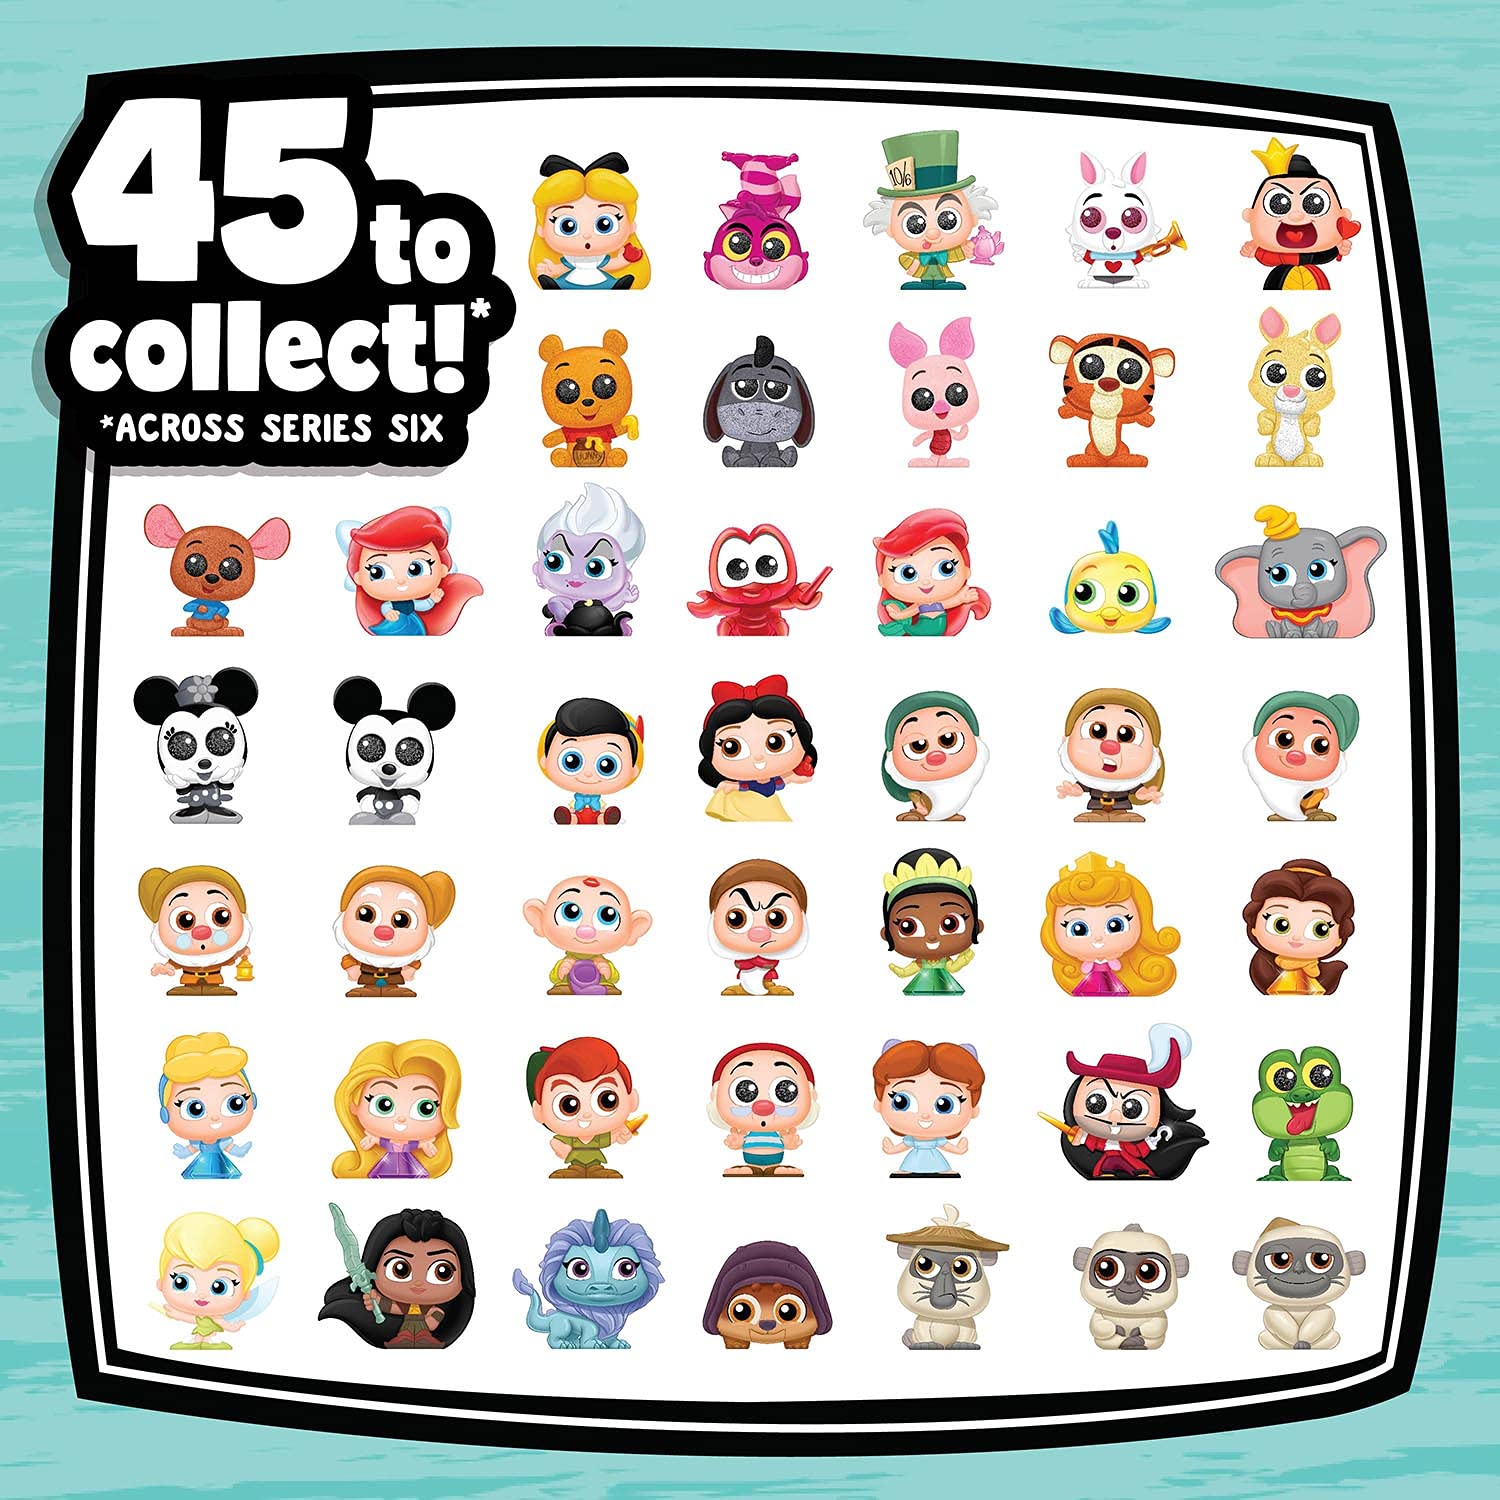 Disney Doorables Multi Peek Series 6 Jeweled Disney Princess Characters, Includes 5, 6, or 7 Collectible Mini Figures, Styles May Vary, by Just Play